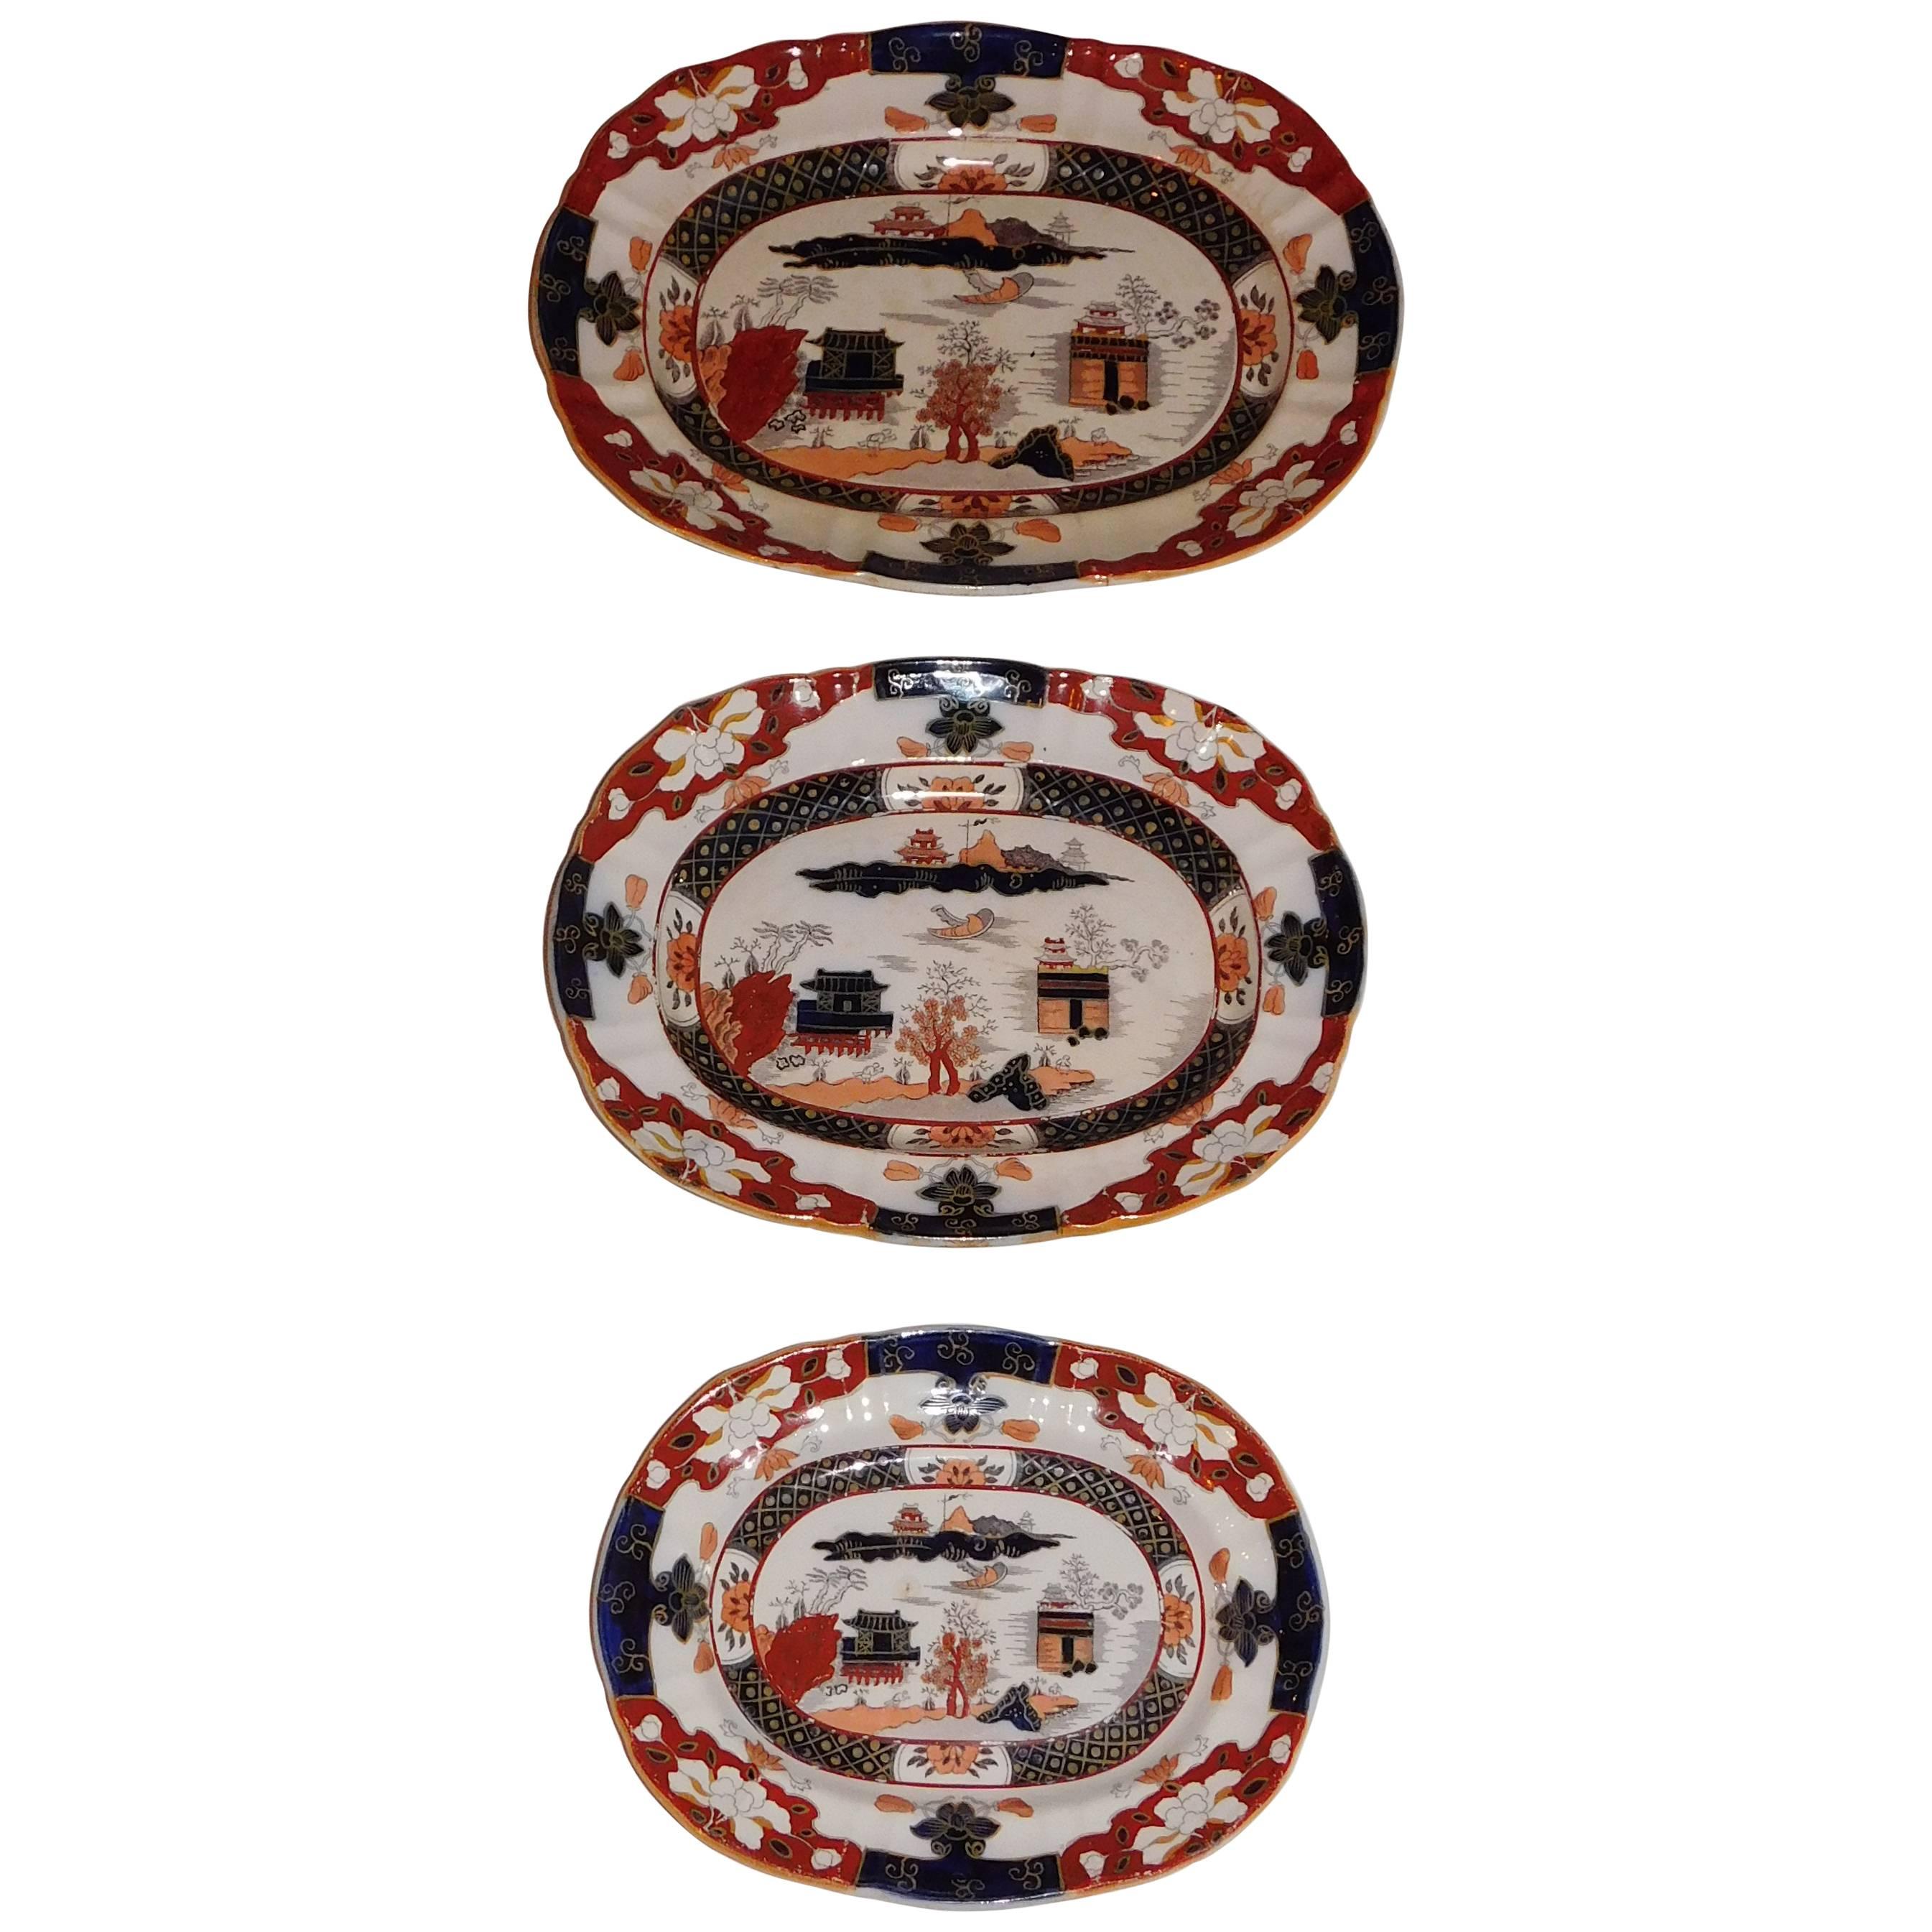 Design in the oriental taste, printed and impressed marks on back, polychrome decoration, ironstone. Measurements below are for the largest platter; others are 13.25" x 10.5" (middle) and 11" x 8.5" (smallest).